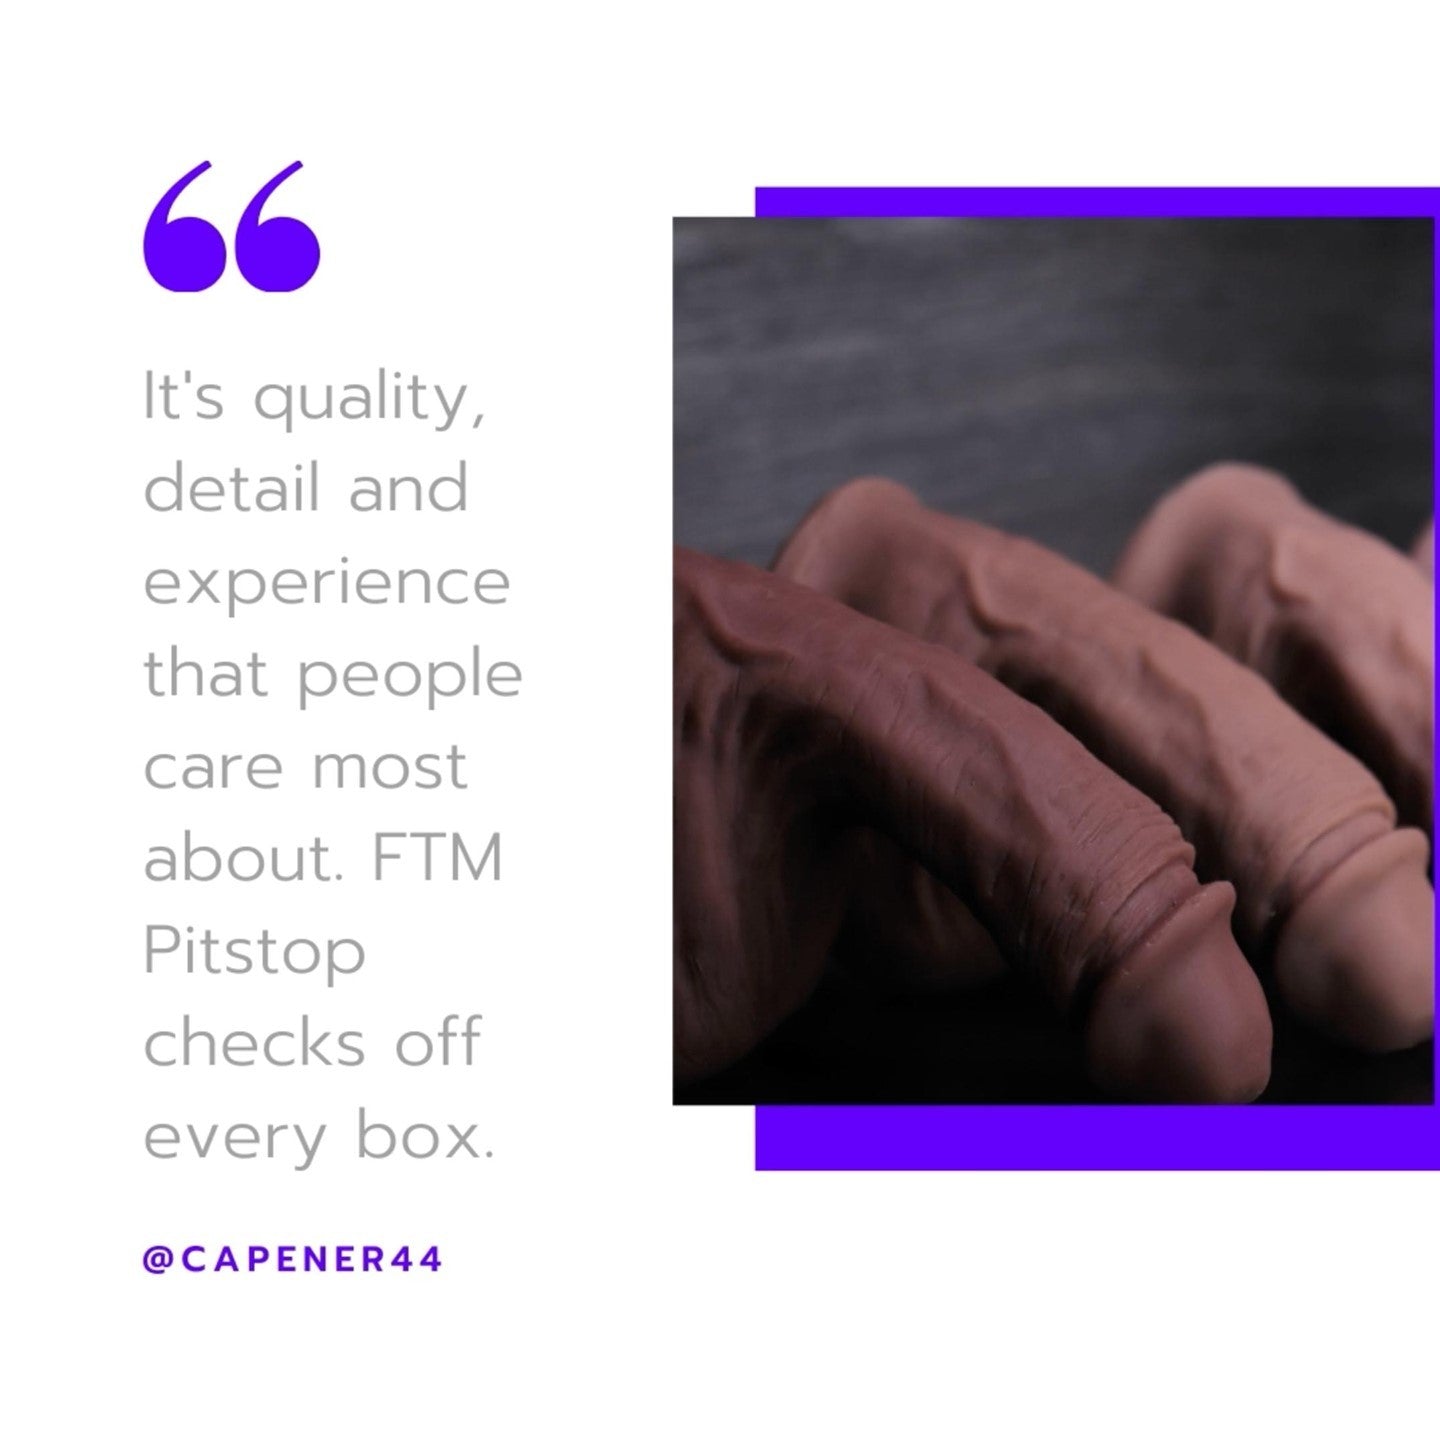 Testimonial, "It's quality, detail and experience that people care most about. FTM Pitstop checks off every box." Aaron Capener44